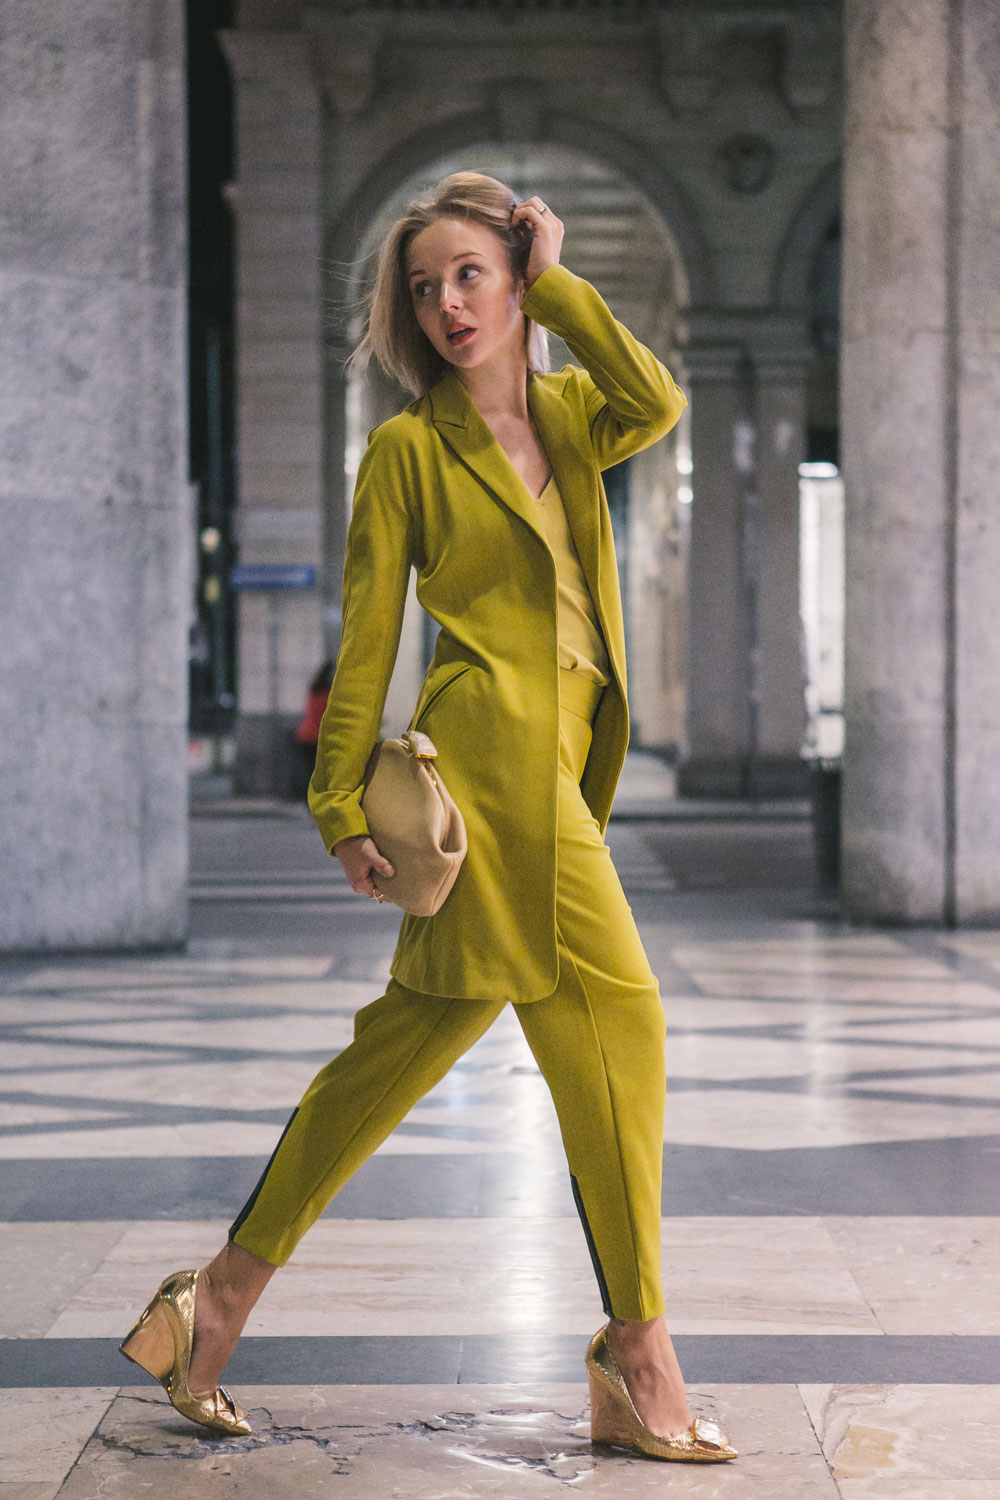 darya-kamalova-fashion-lifestyle-blogger-from-thecablook-on-san-pietro-all-orto-opening-party-in-milan-wears-asos-suit-marni-clutch-burberry-prosum-wedges-6916